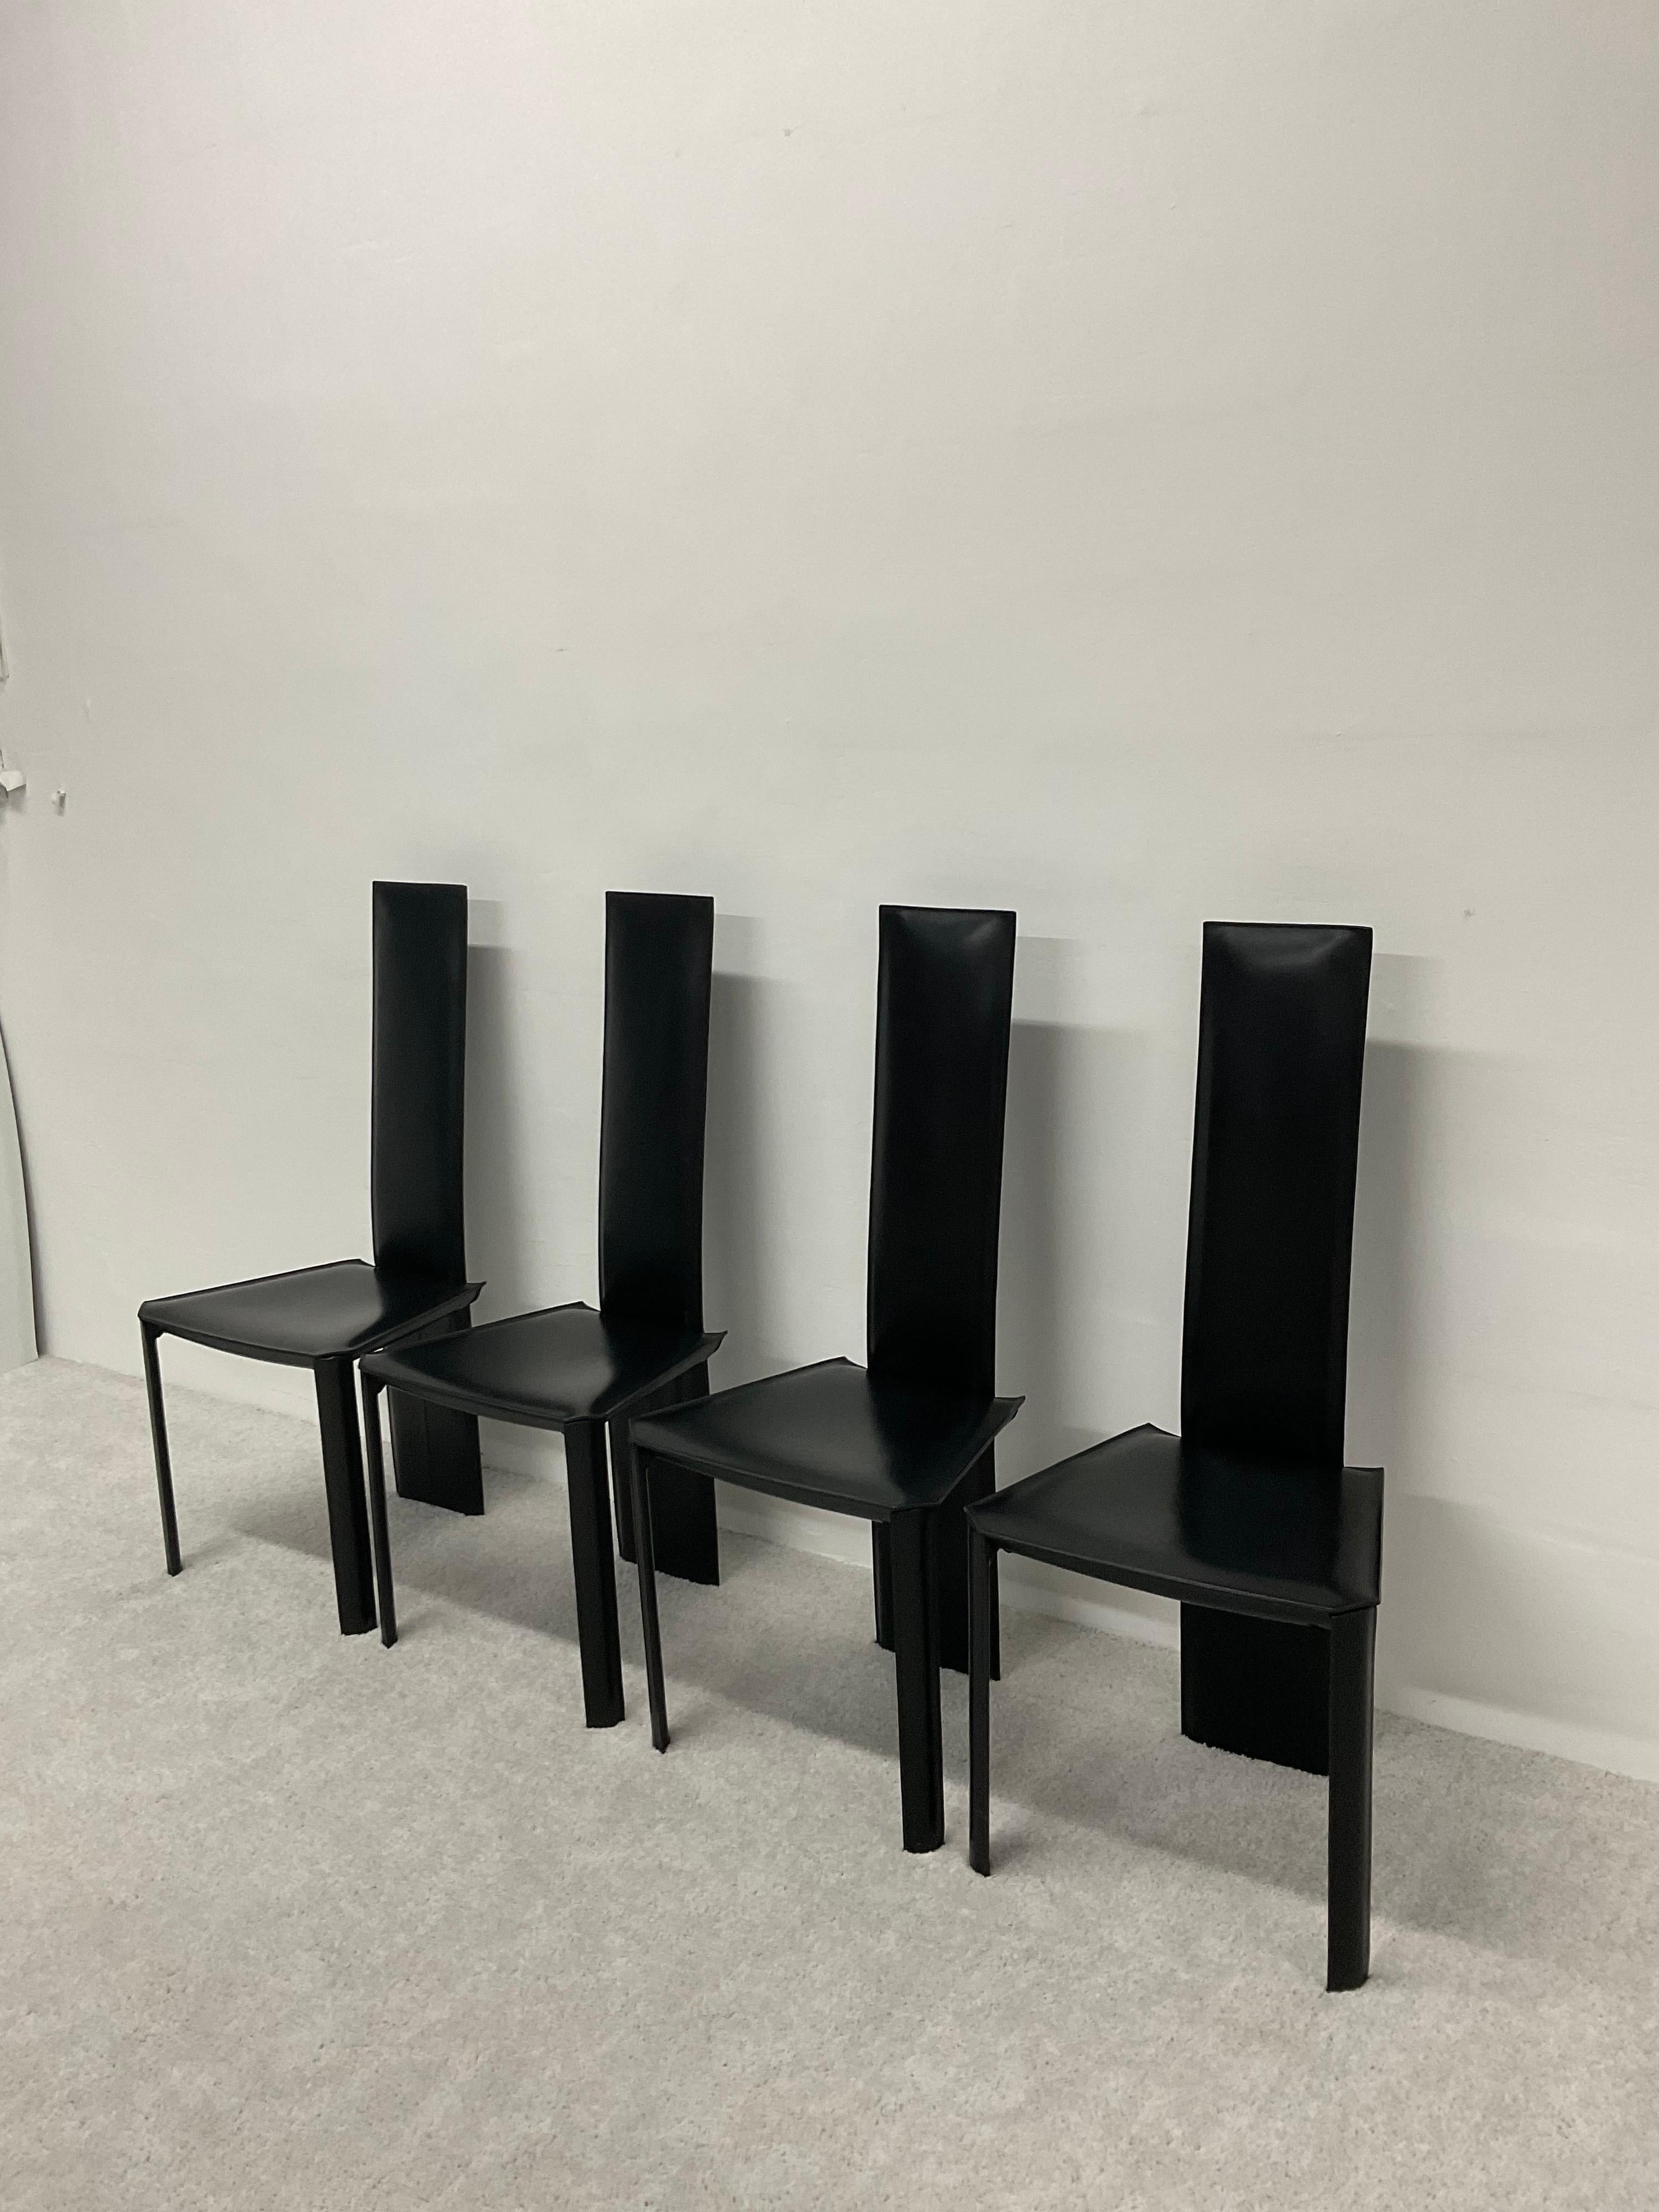 Set of four Brazilian Postmodern black hand stitched leather dining chairs by De Couro, 1980s. These rare chairs share similar qualities to the Mario Bellini CAB chairs for Cassina.